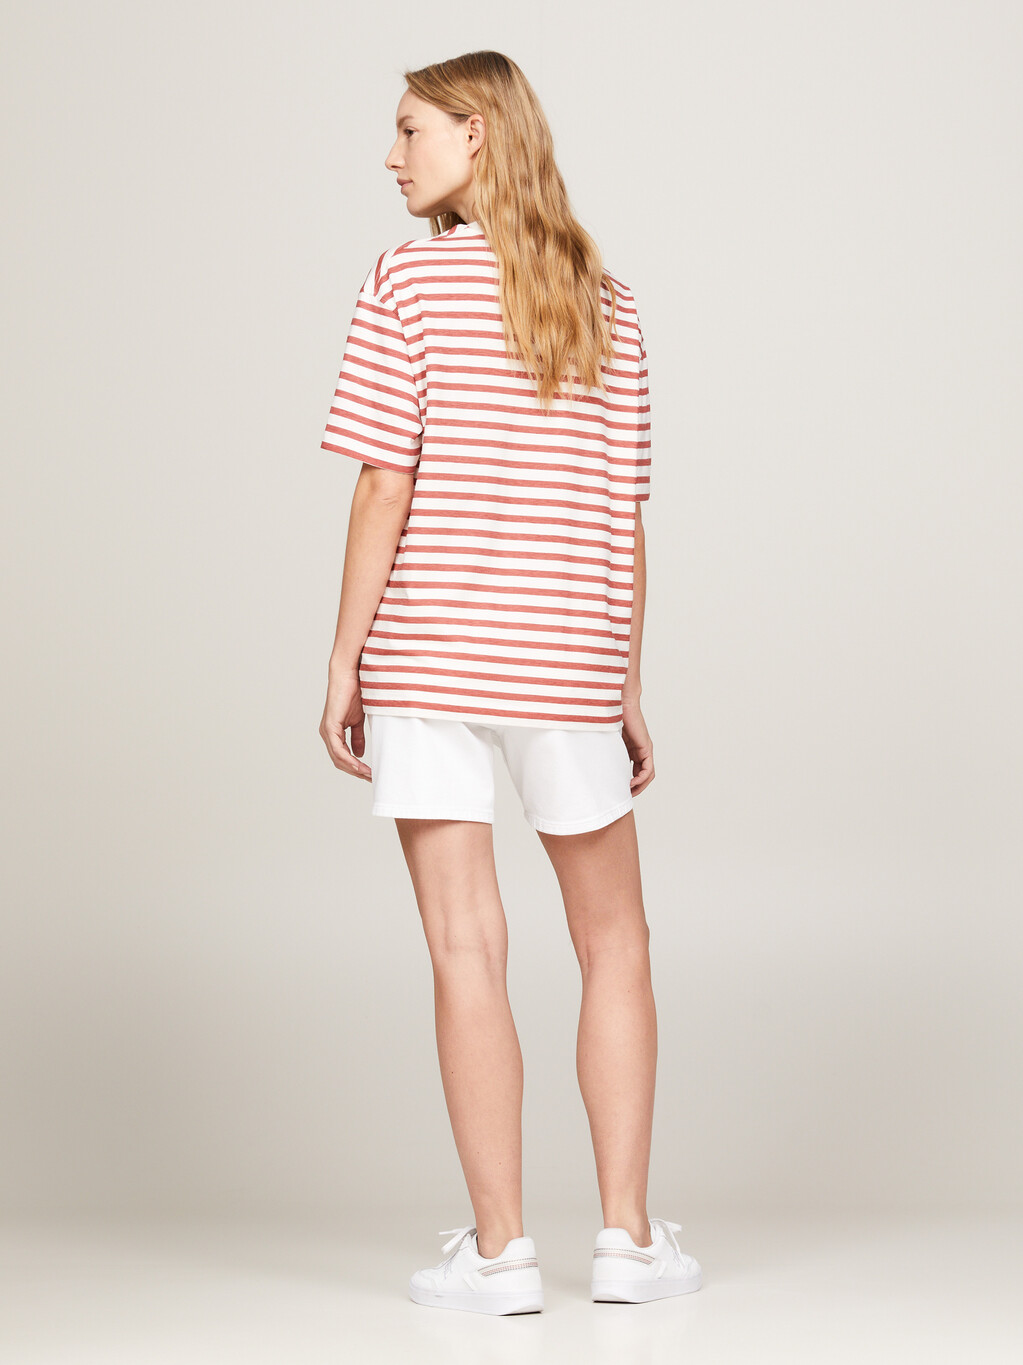 Stripe Relaxed Fit T-Shirt, Reg Stp Ancient White/ Terra Red, hi-res